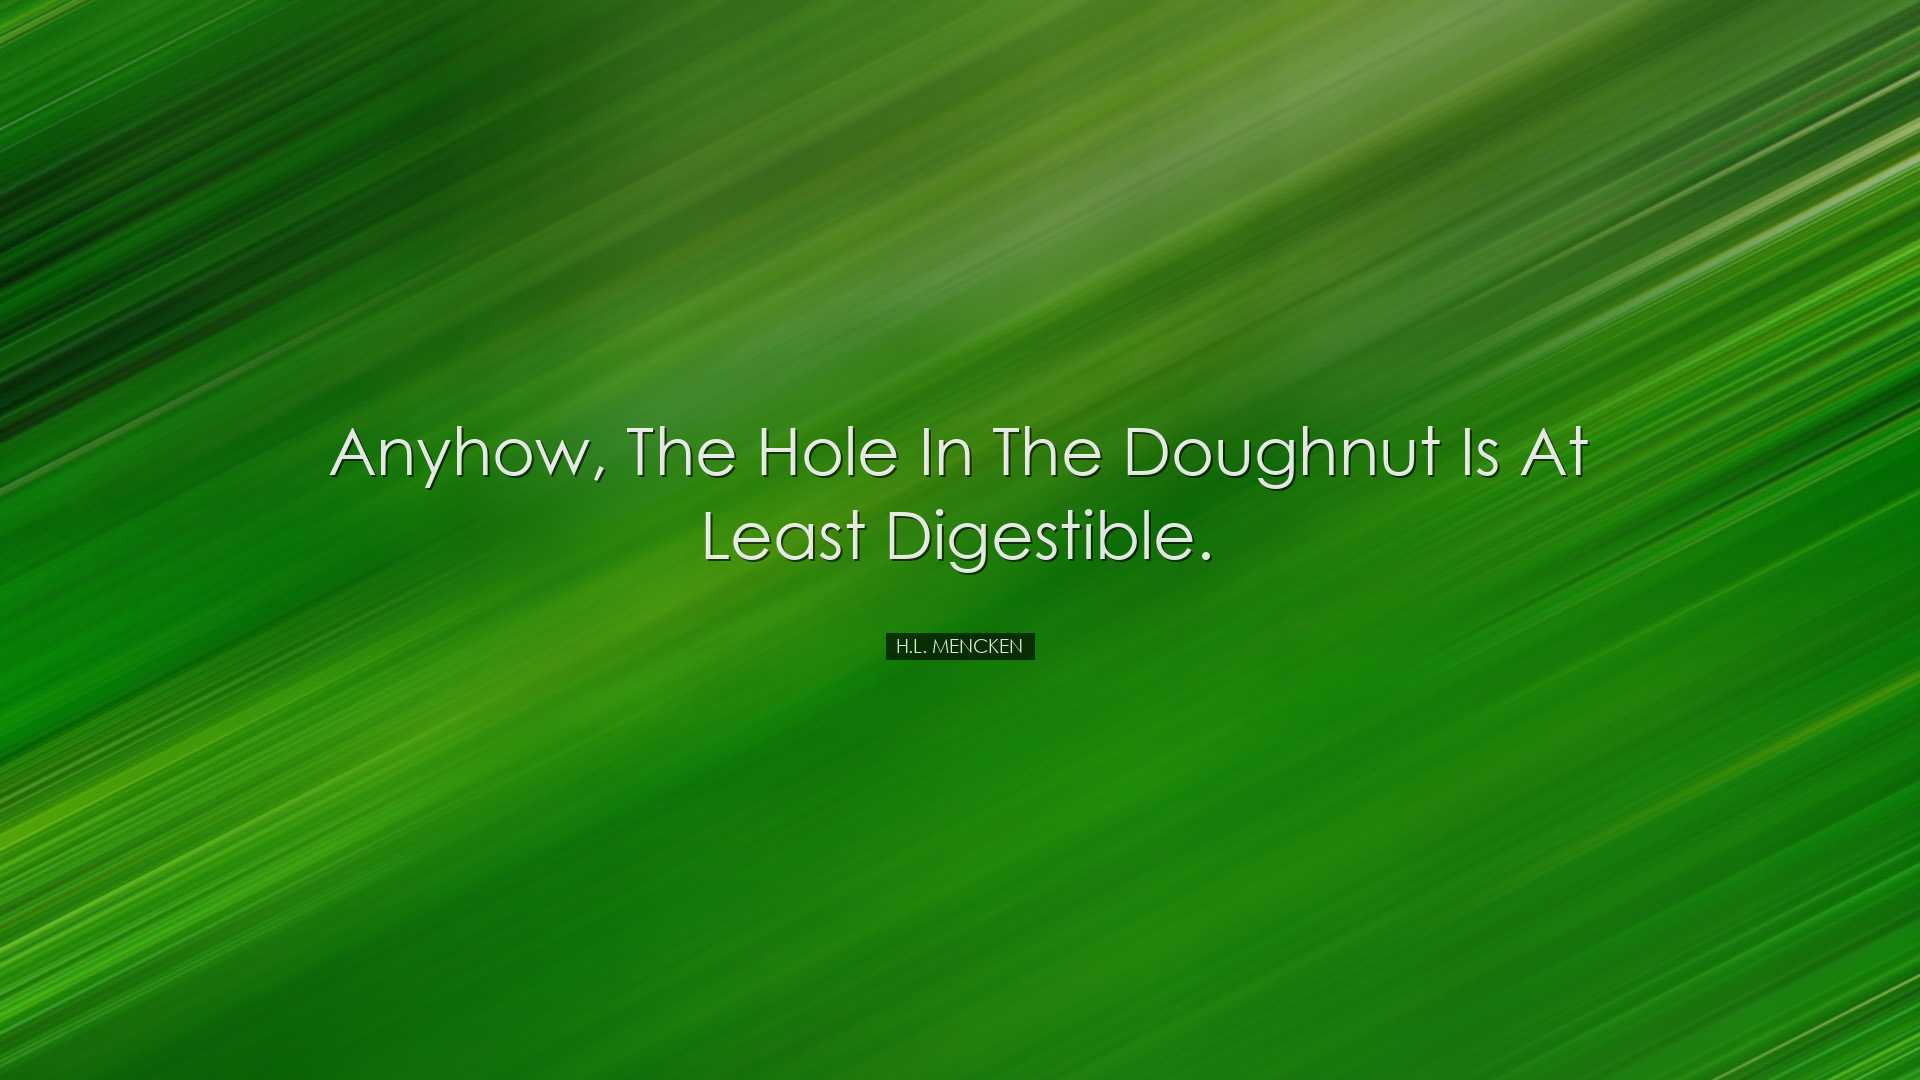 Anyhow, the hole in the doughnut is at least digestible. - H.L. Me